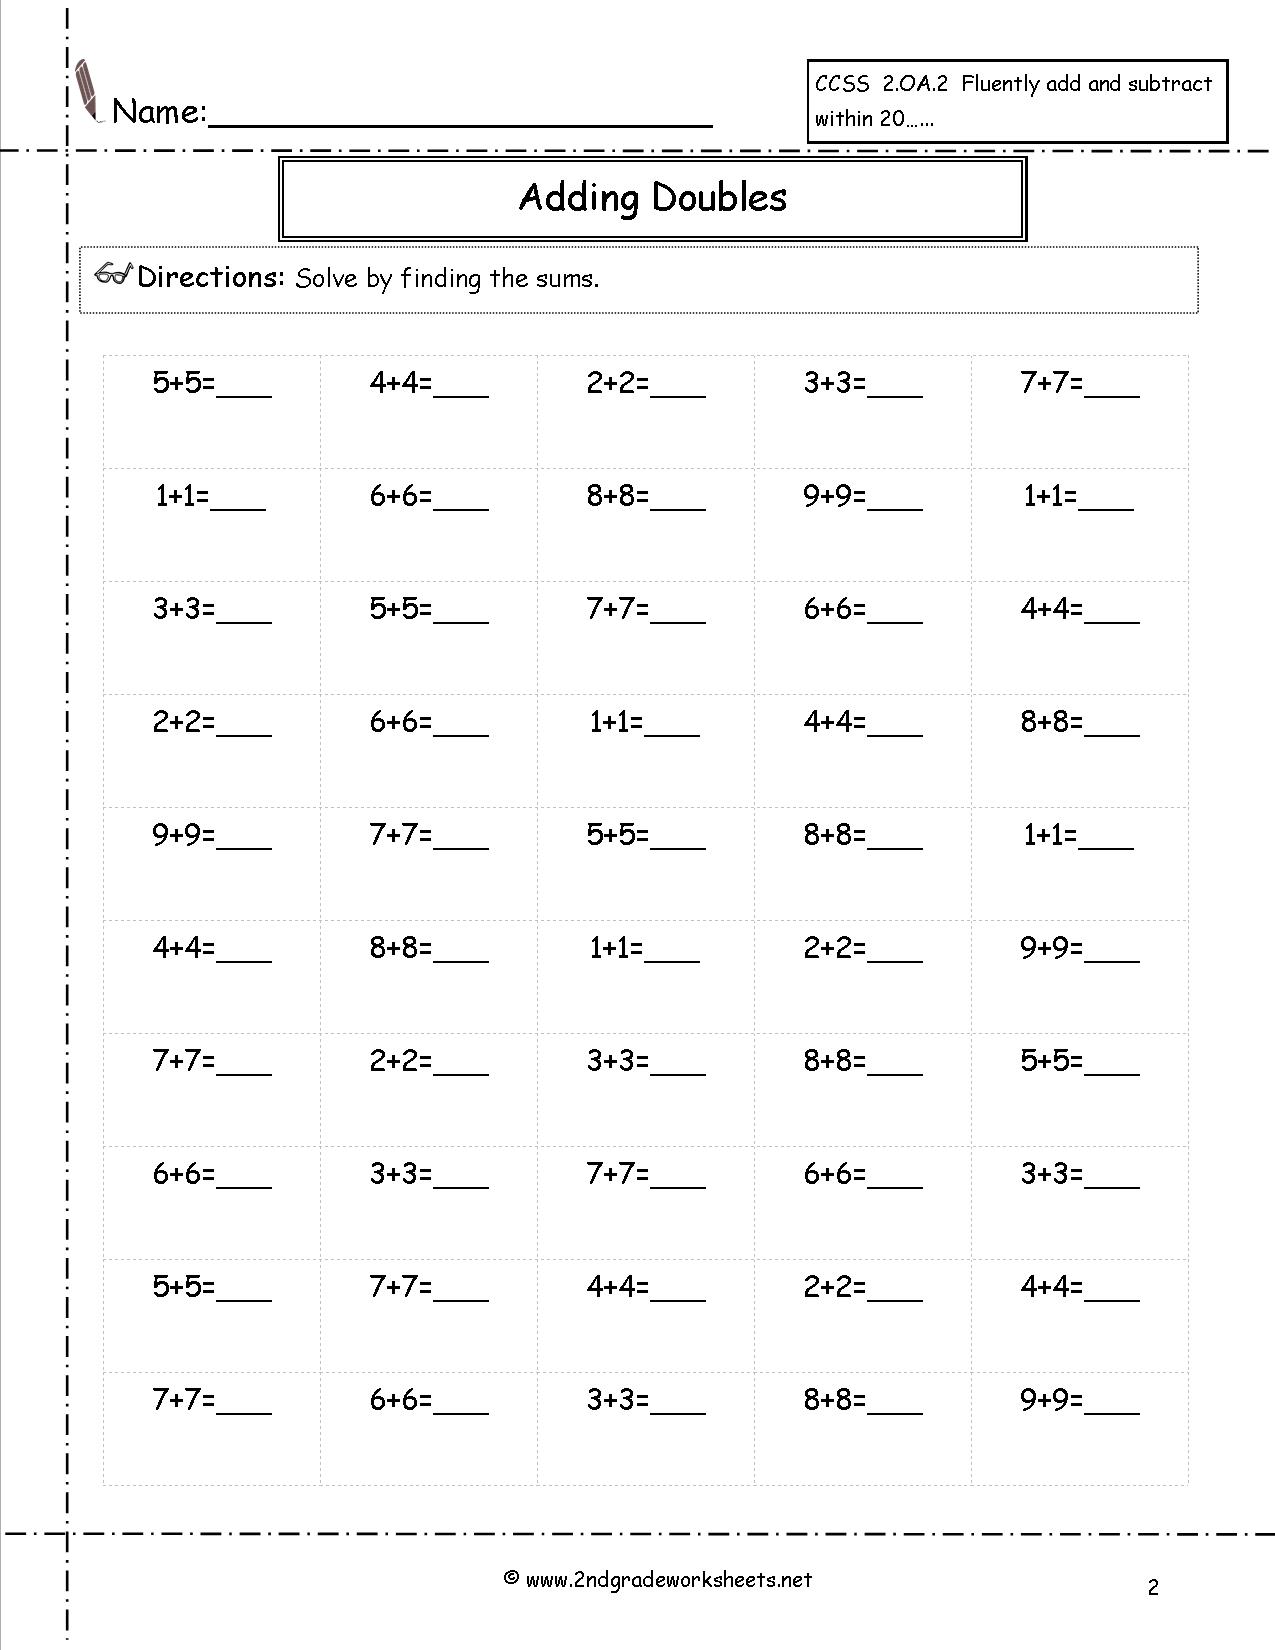 15 Best Images of Second Grade Doubles Addition Worksheet - Doubles